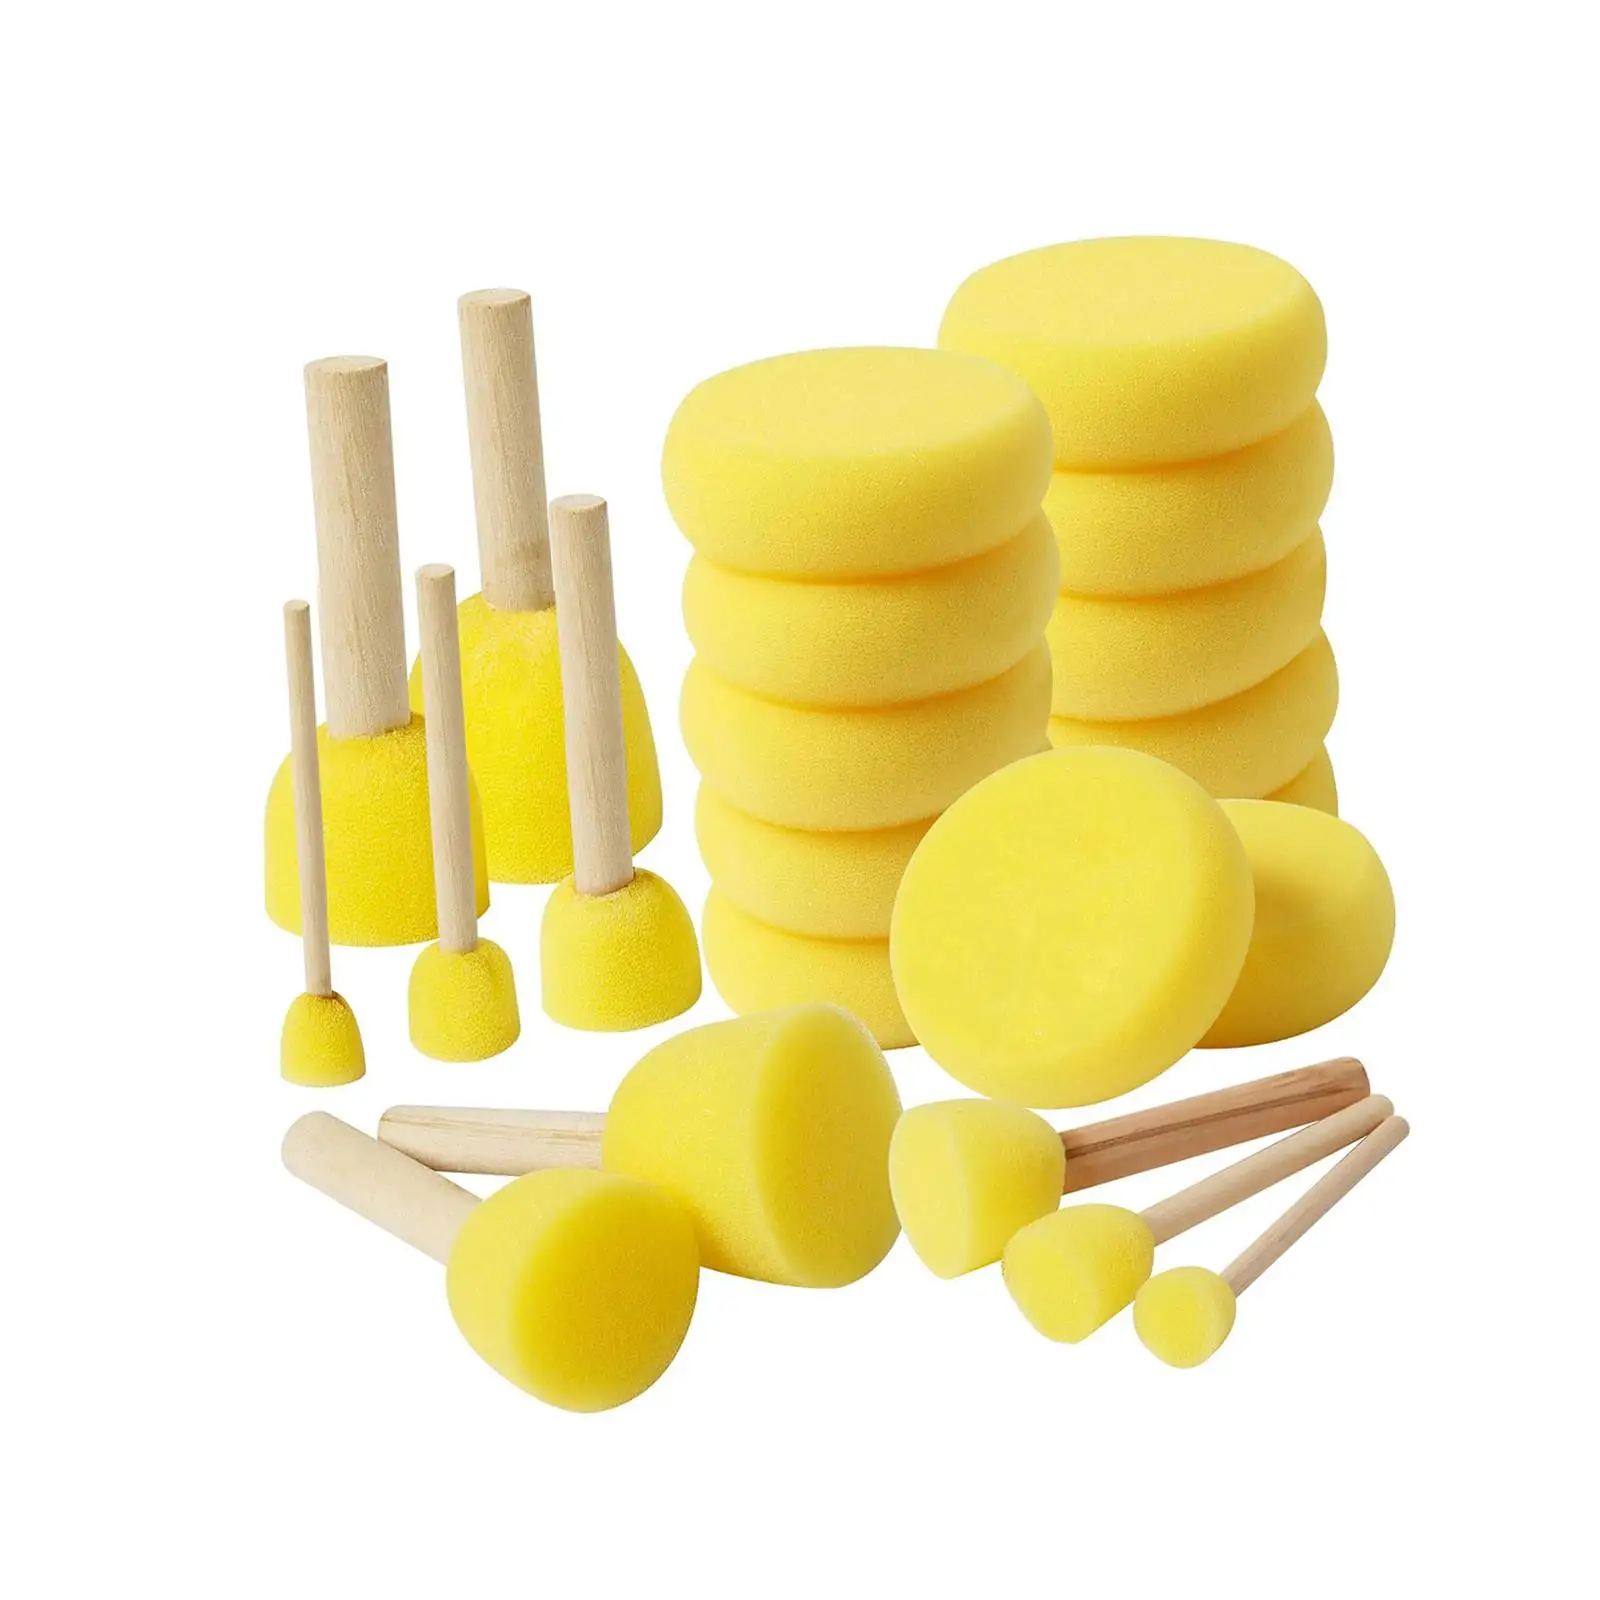 22 Pieces Sponge Stamp Toy Children Drawing Tools Foam Painting Brushes Kids Painting Supply Wooden Handle Paint Sponges